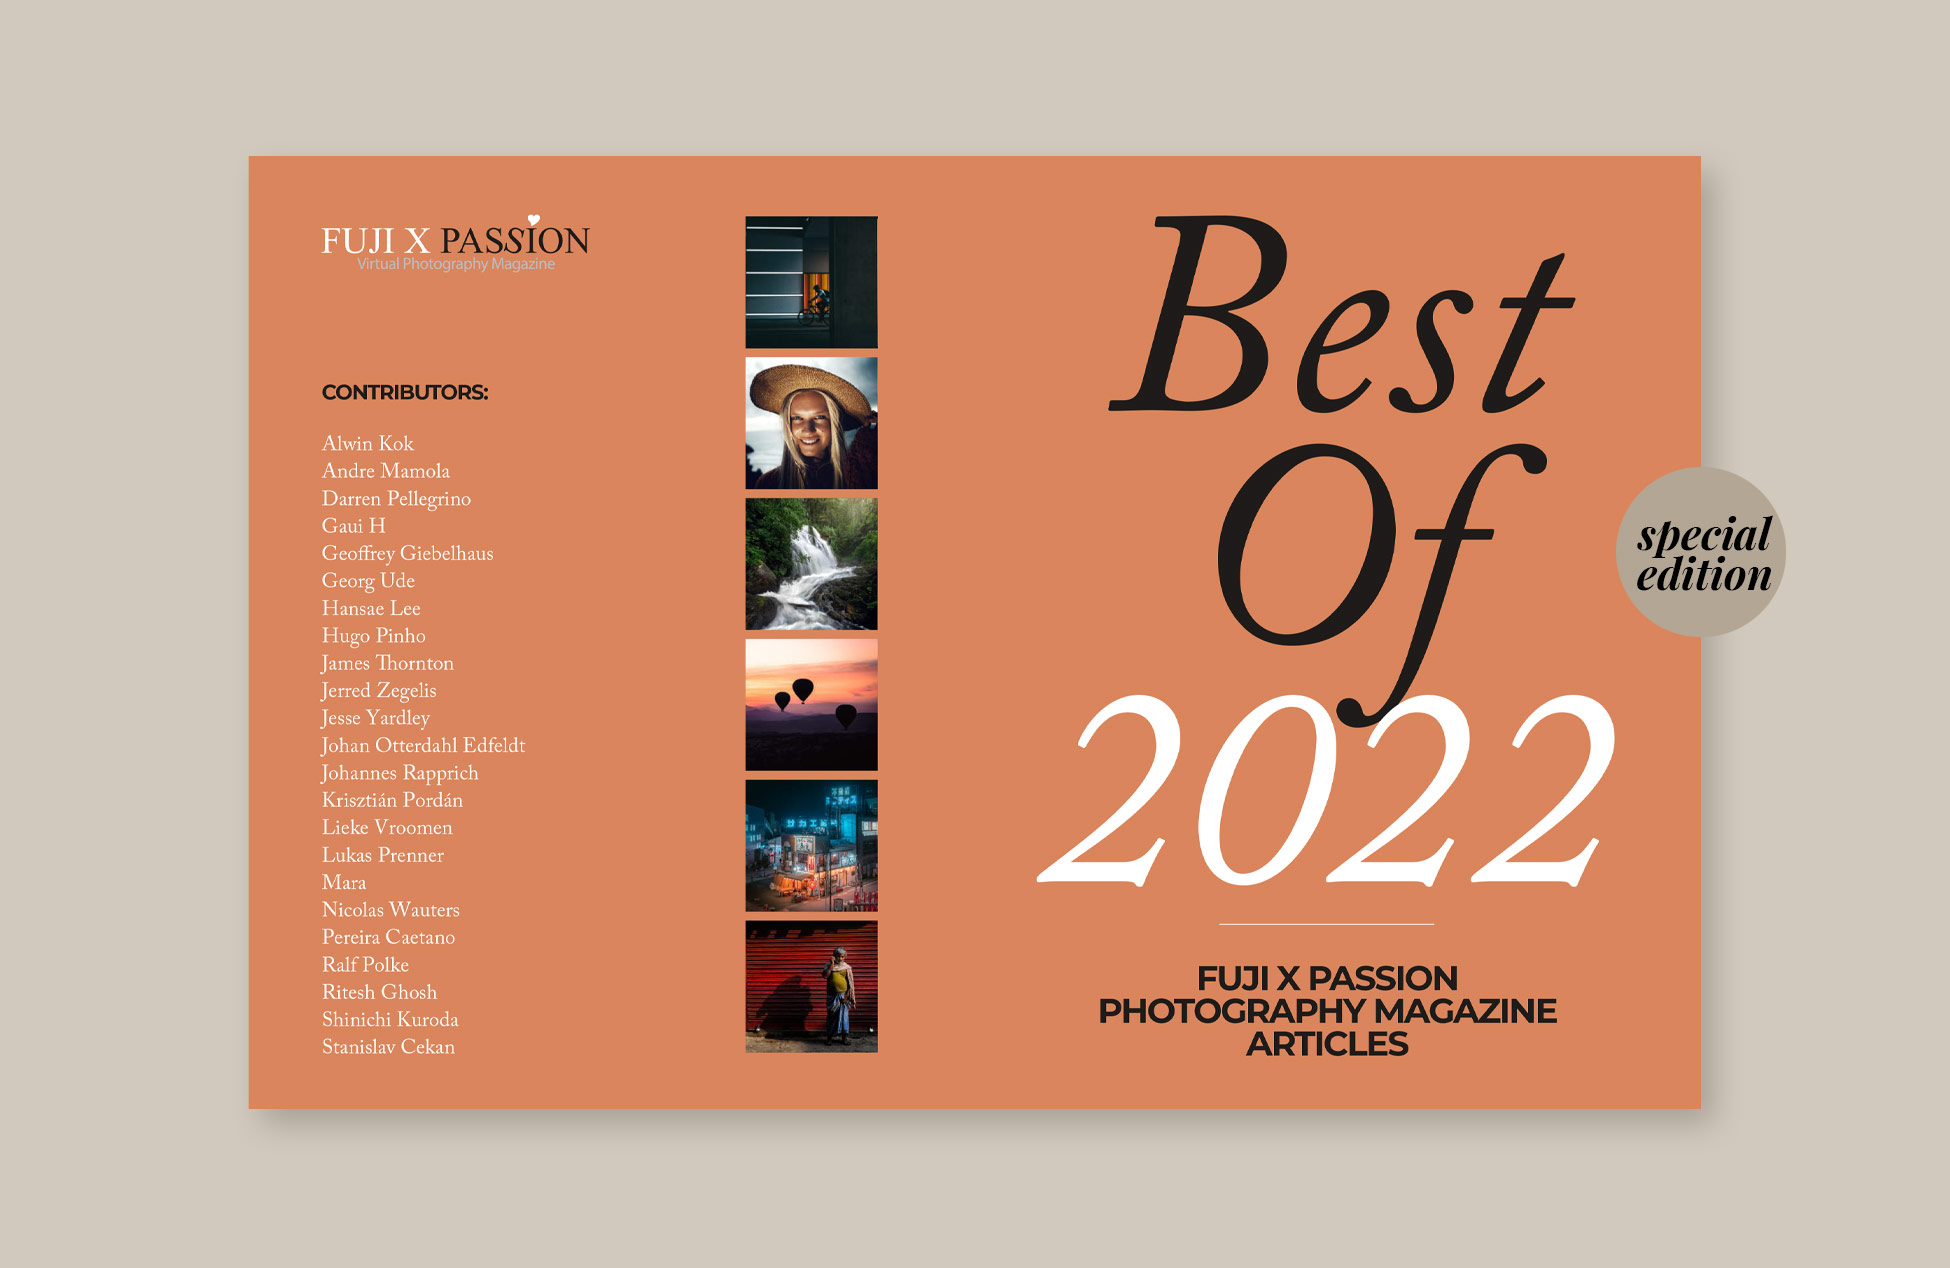 “Best Of” Fuji X Passion Magazine – a Special Edition for the Summer 2022!